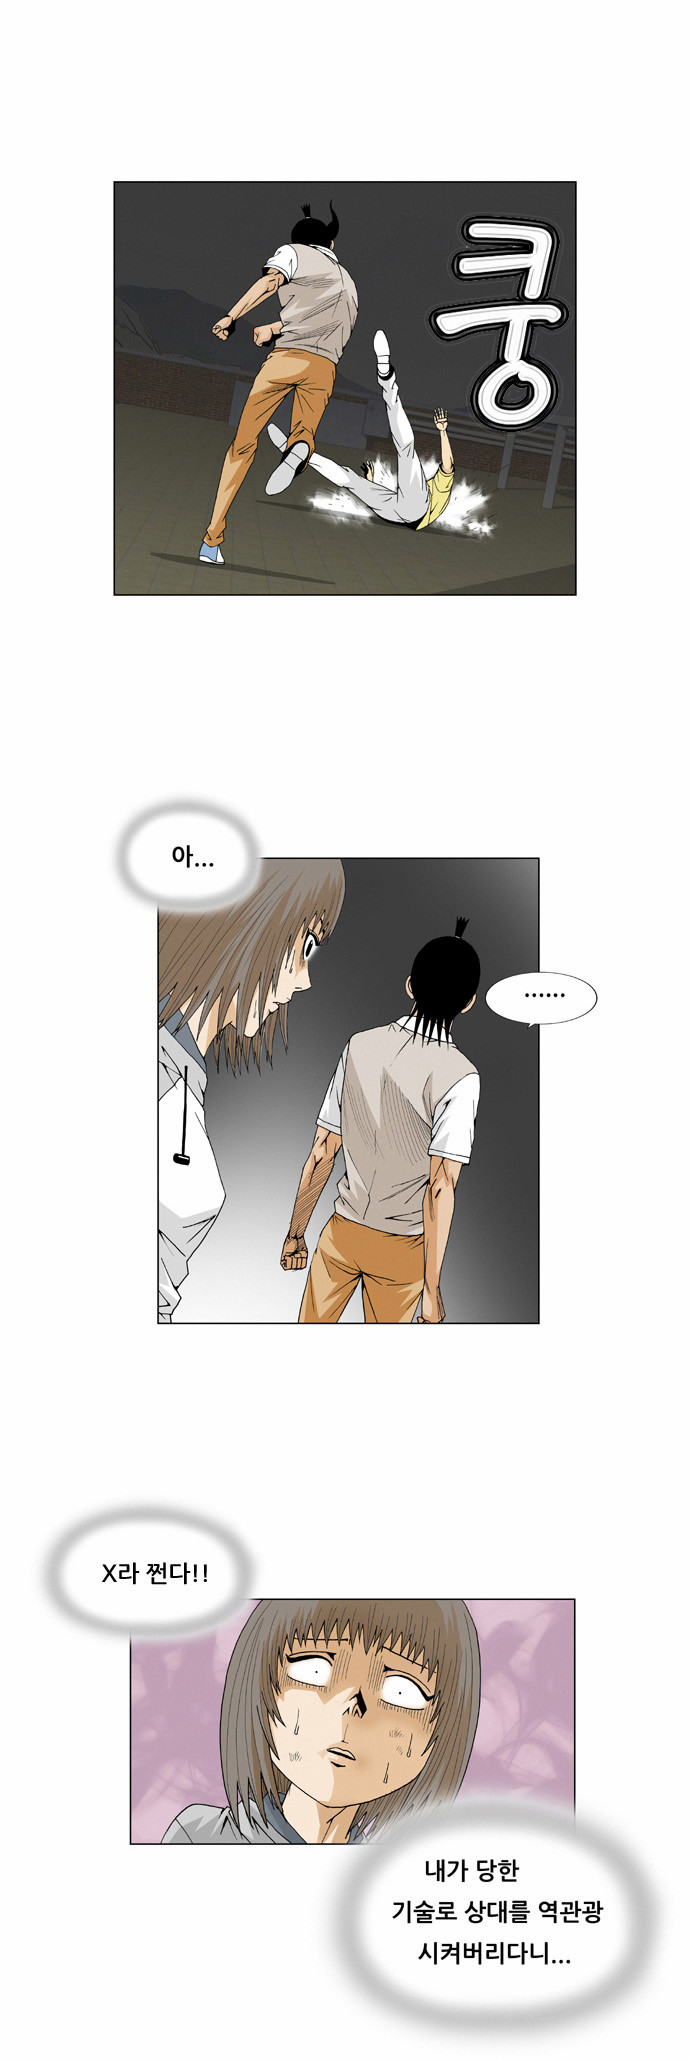 Ultimate Legend - Kang Hae Hyo - Chapter 37 - Page 5